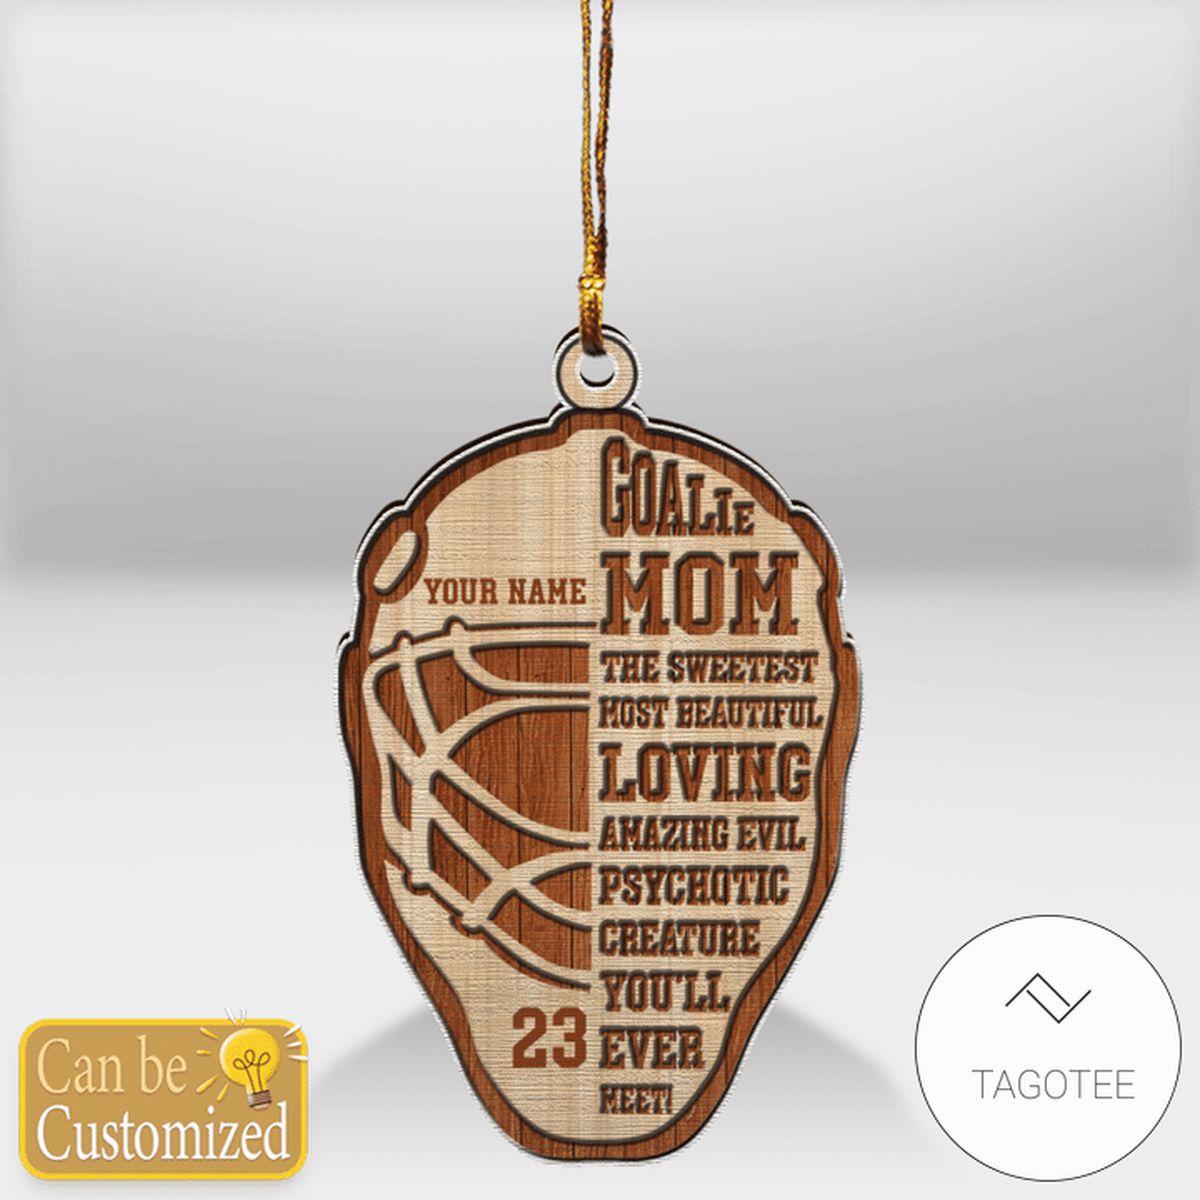 Personalized Goalie Mom The Sweetest Most Beautiful Loving Ornament